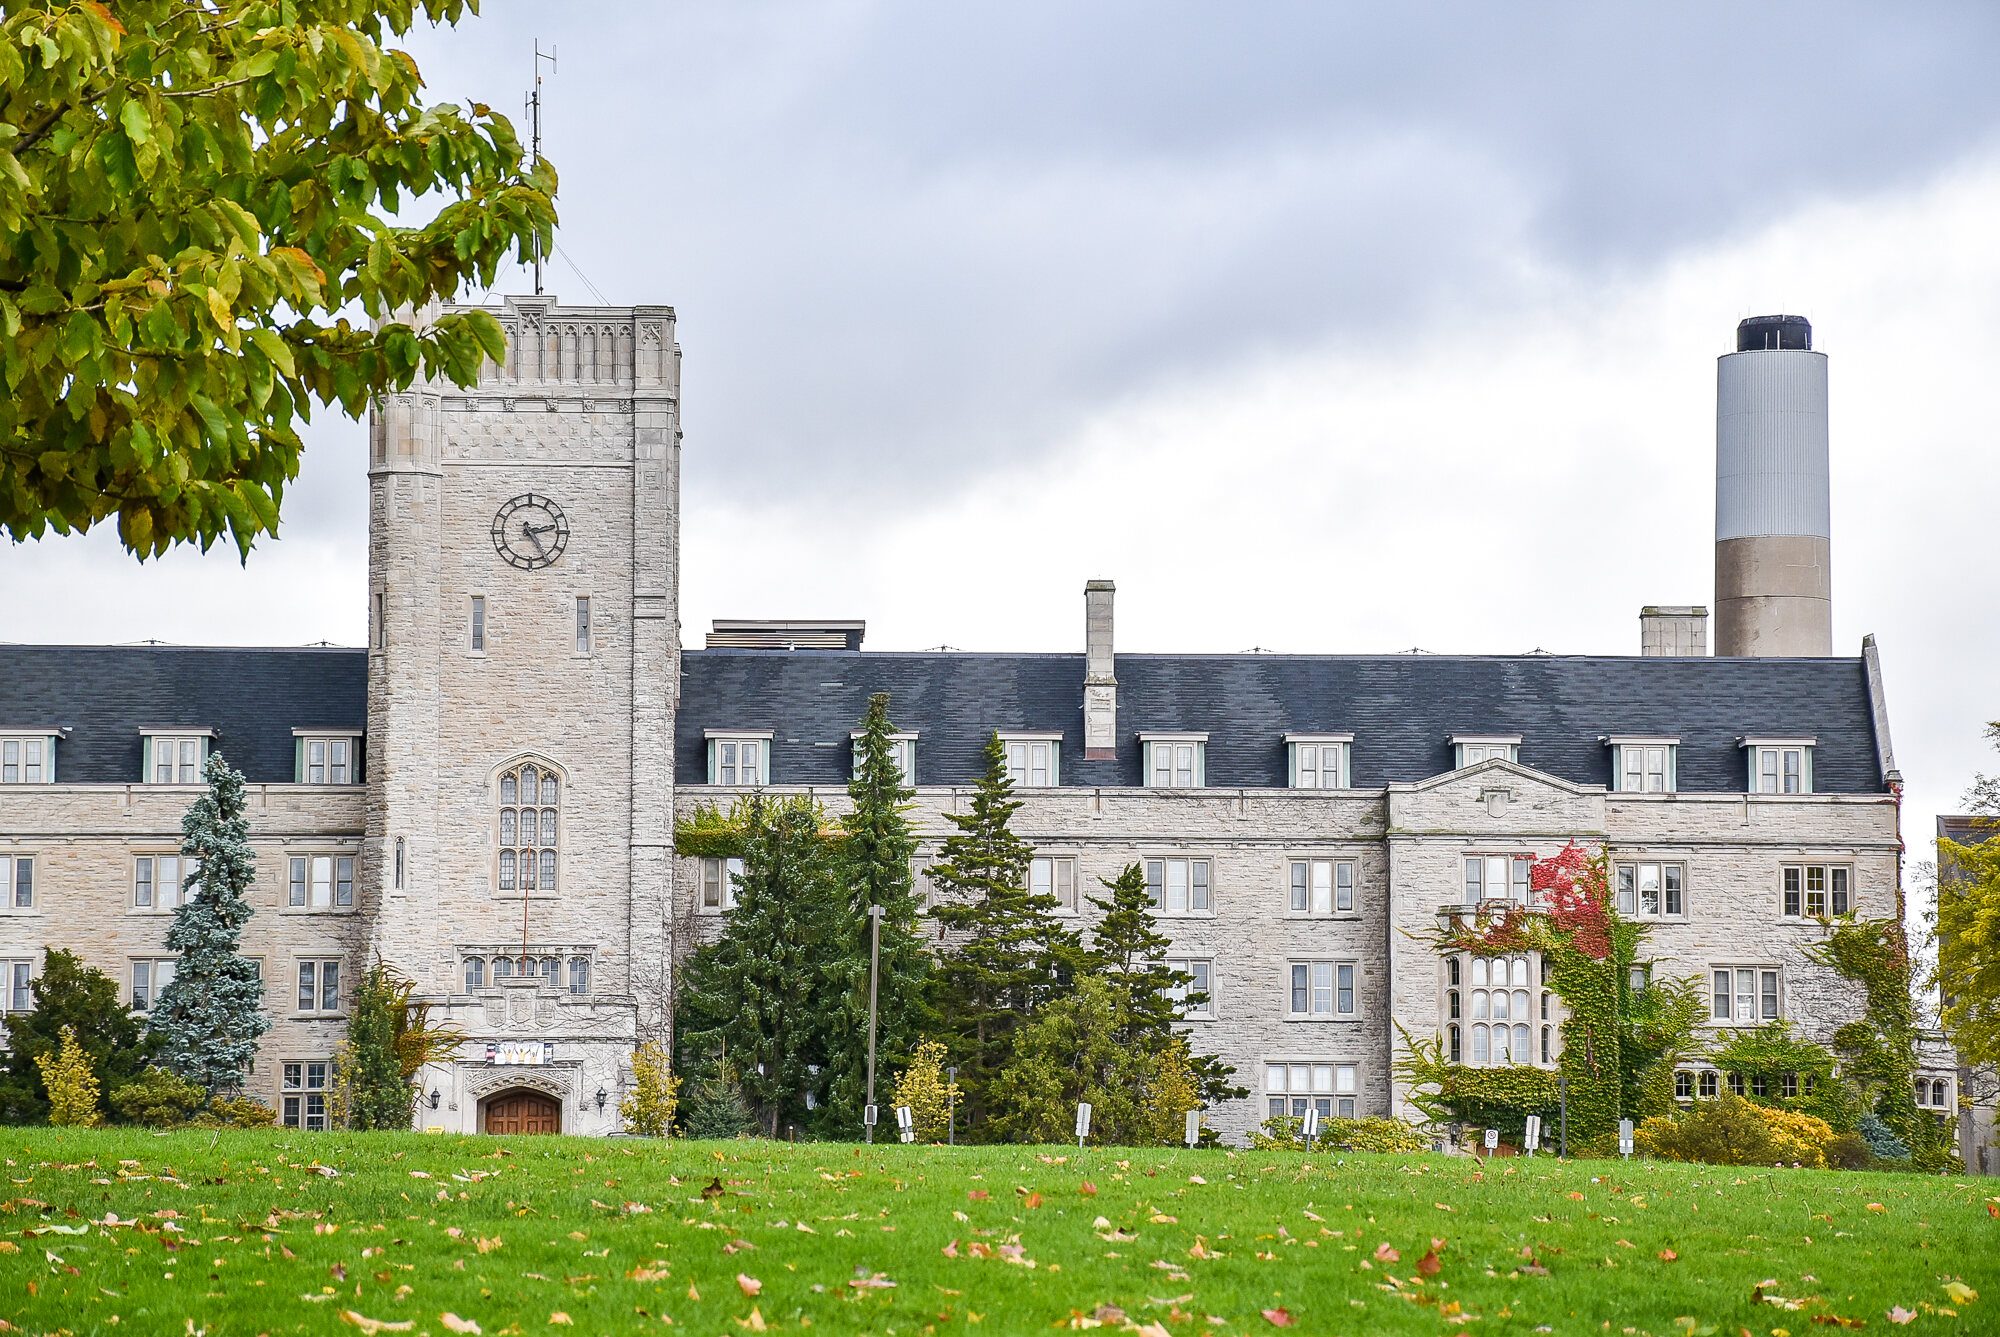 times higher education ranking guelph